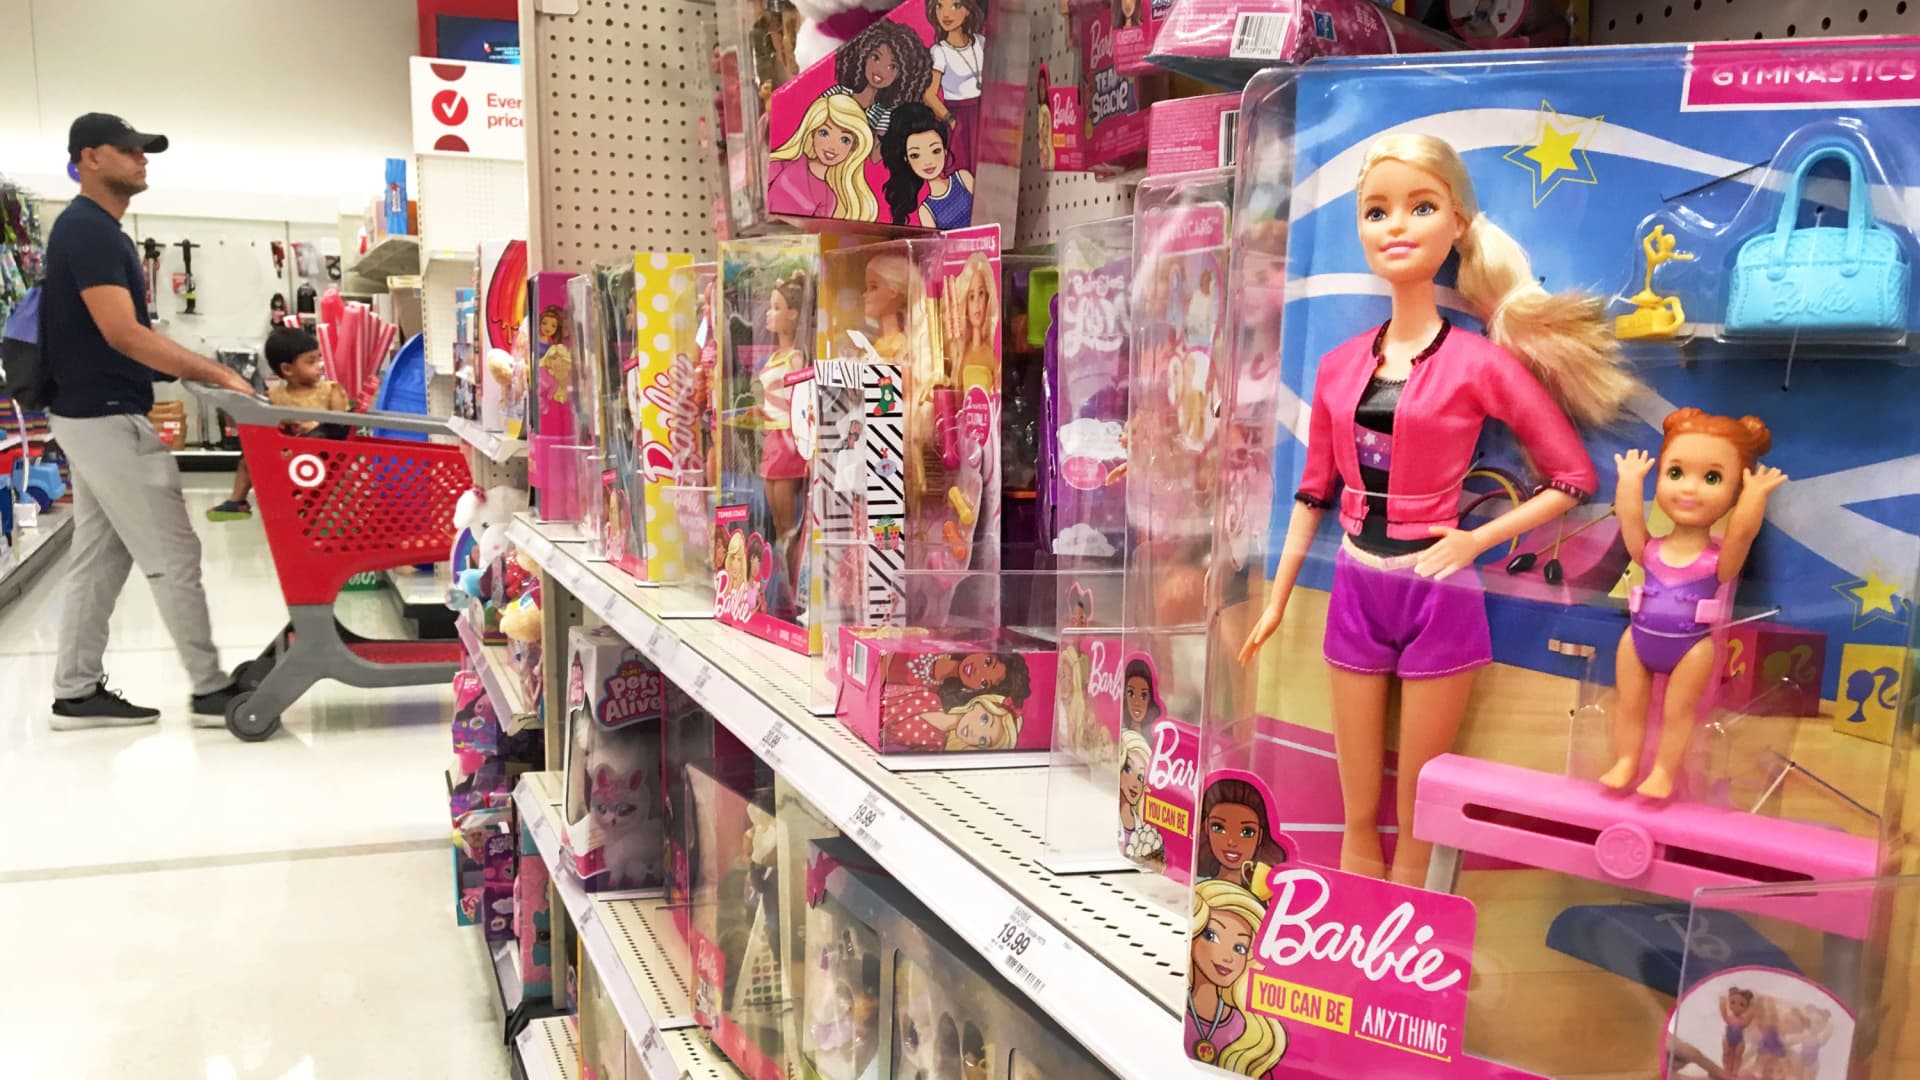 Barbie dolls for sale at a Target store.